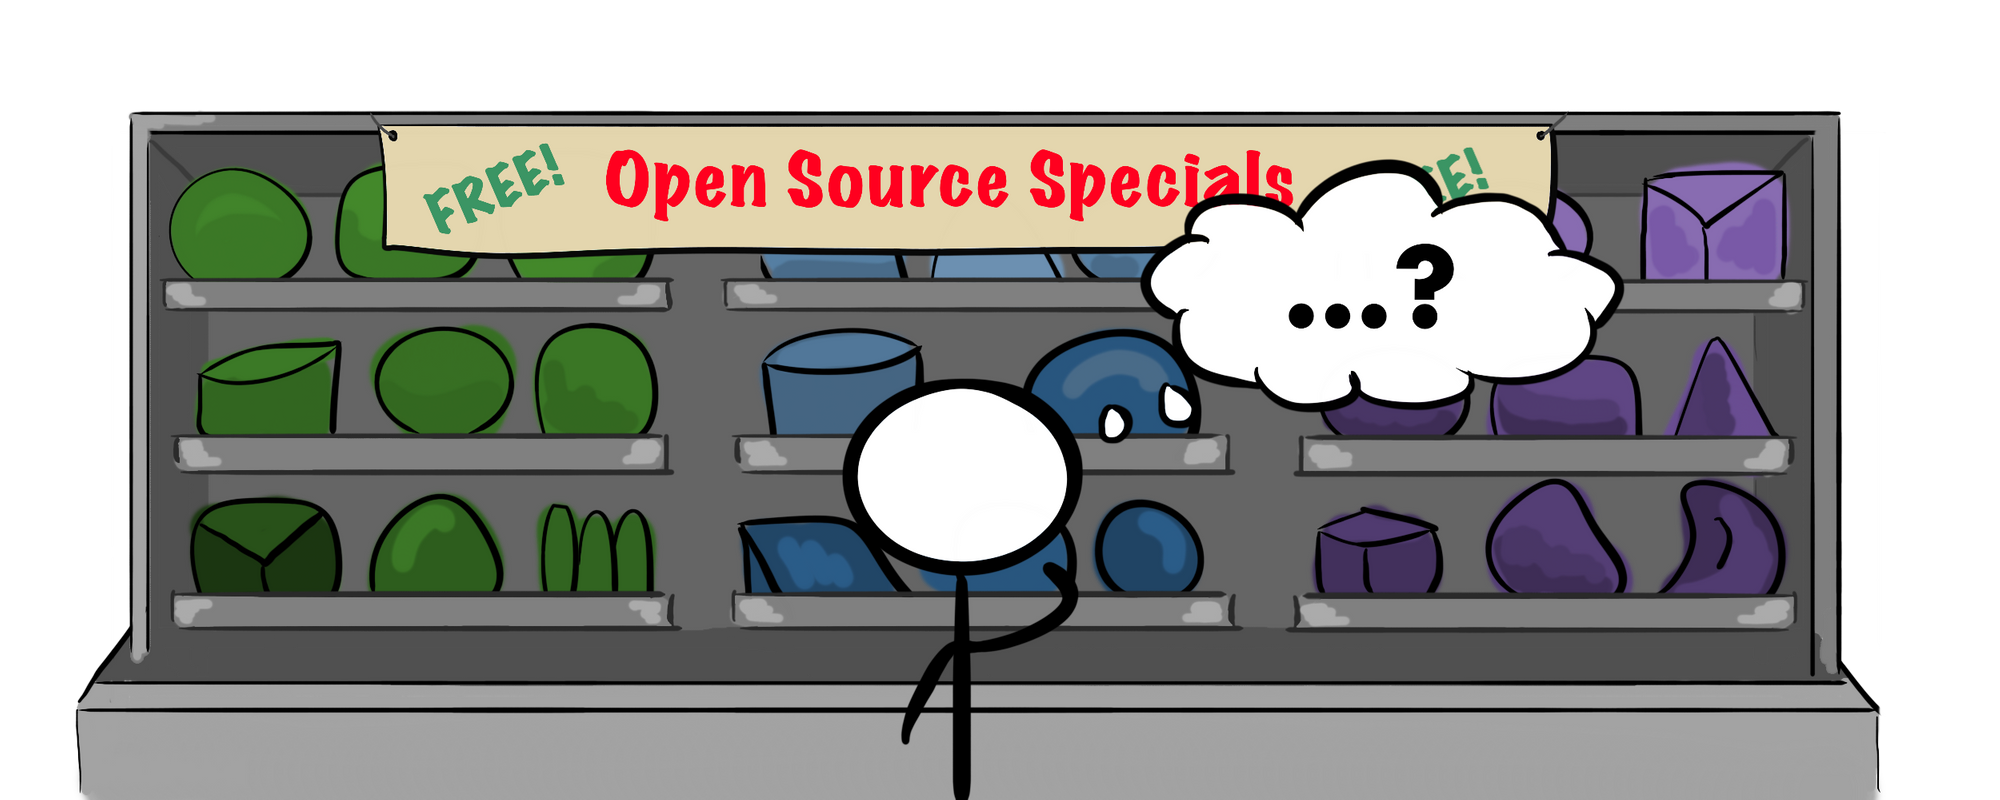 How to Choose and Care for a Secure Open Source Project